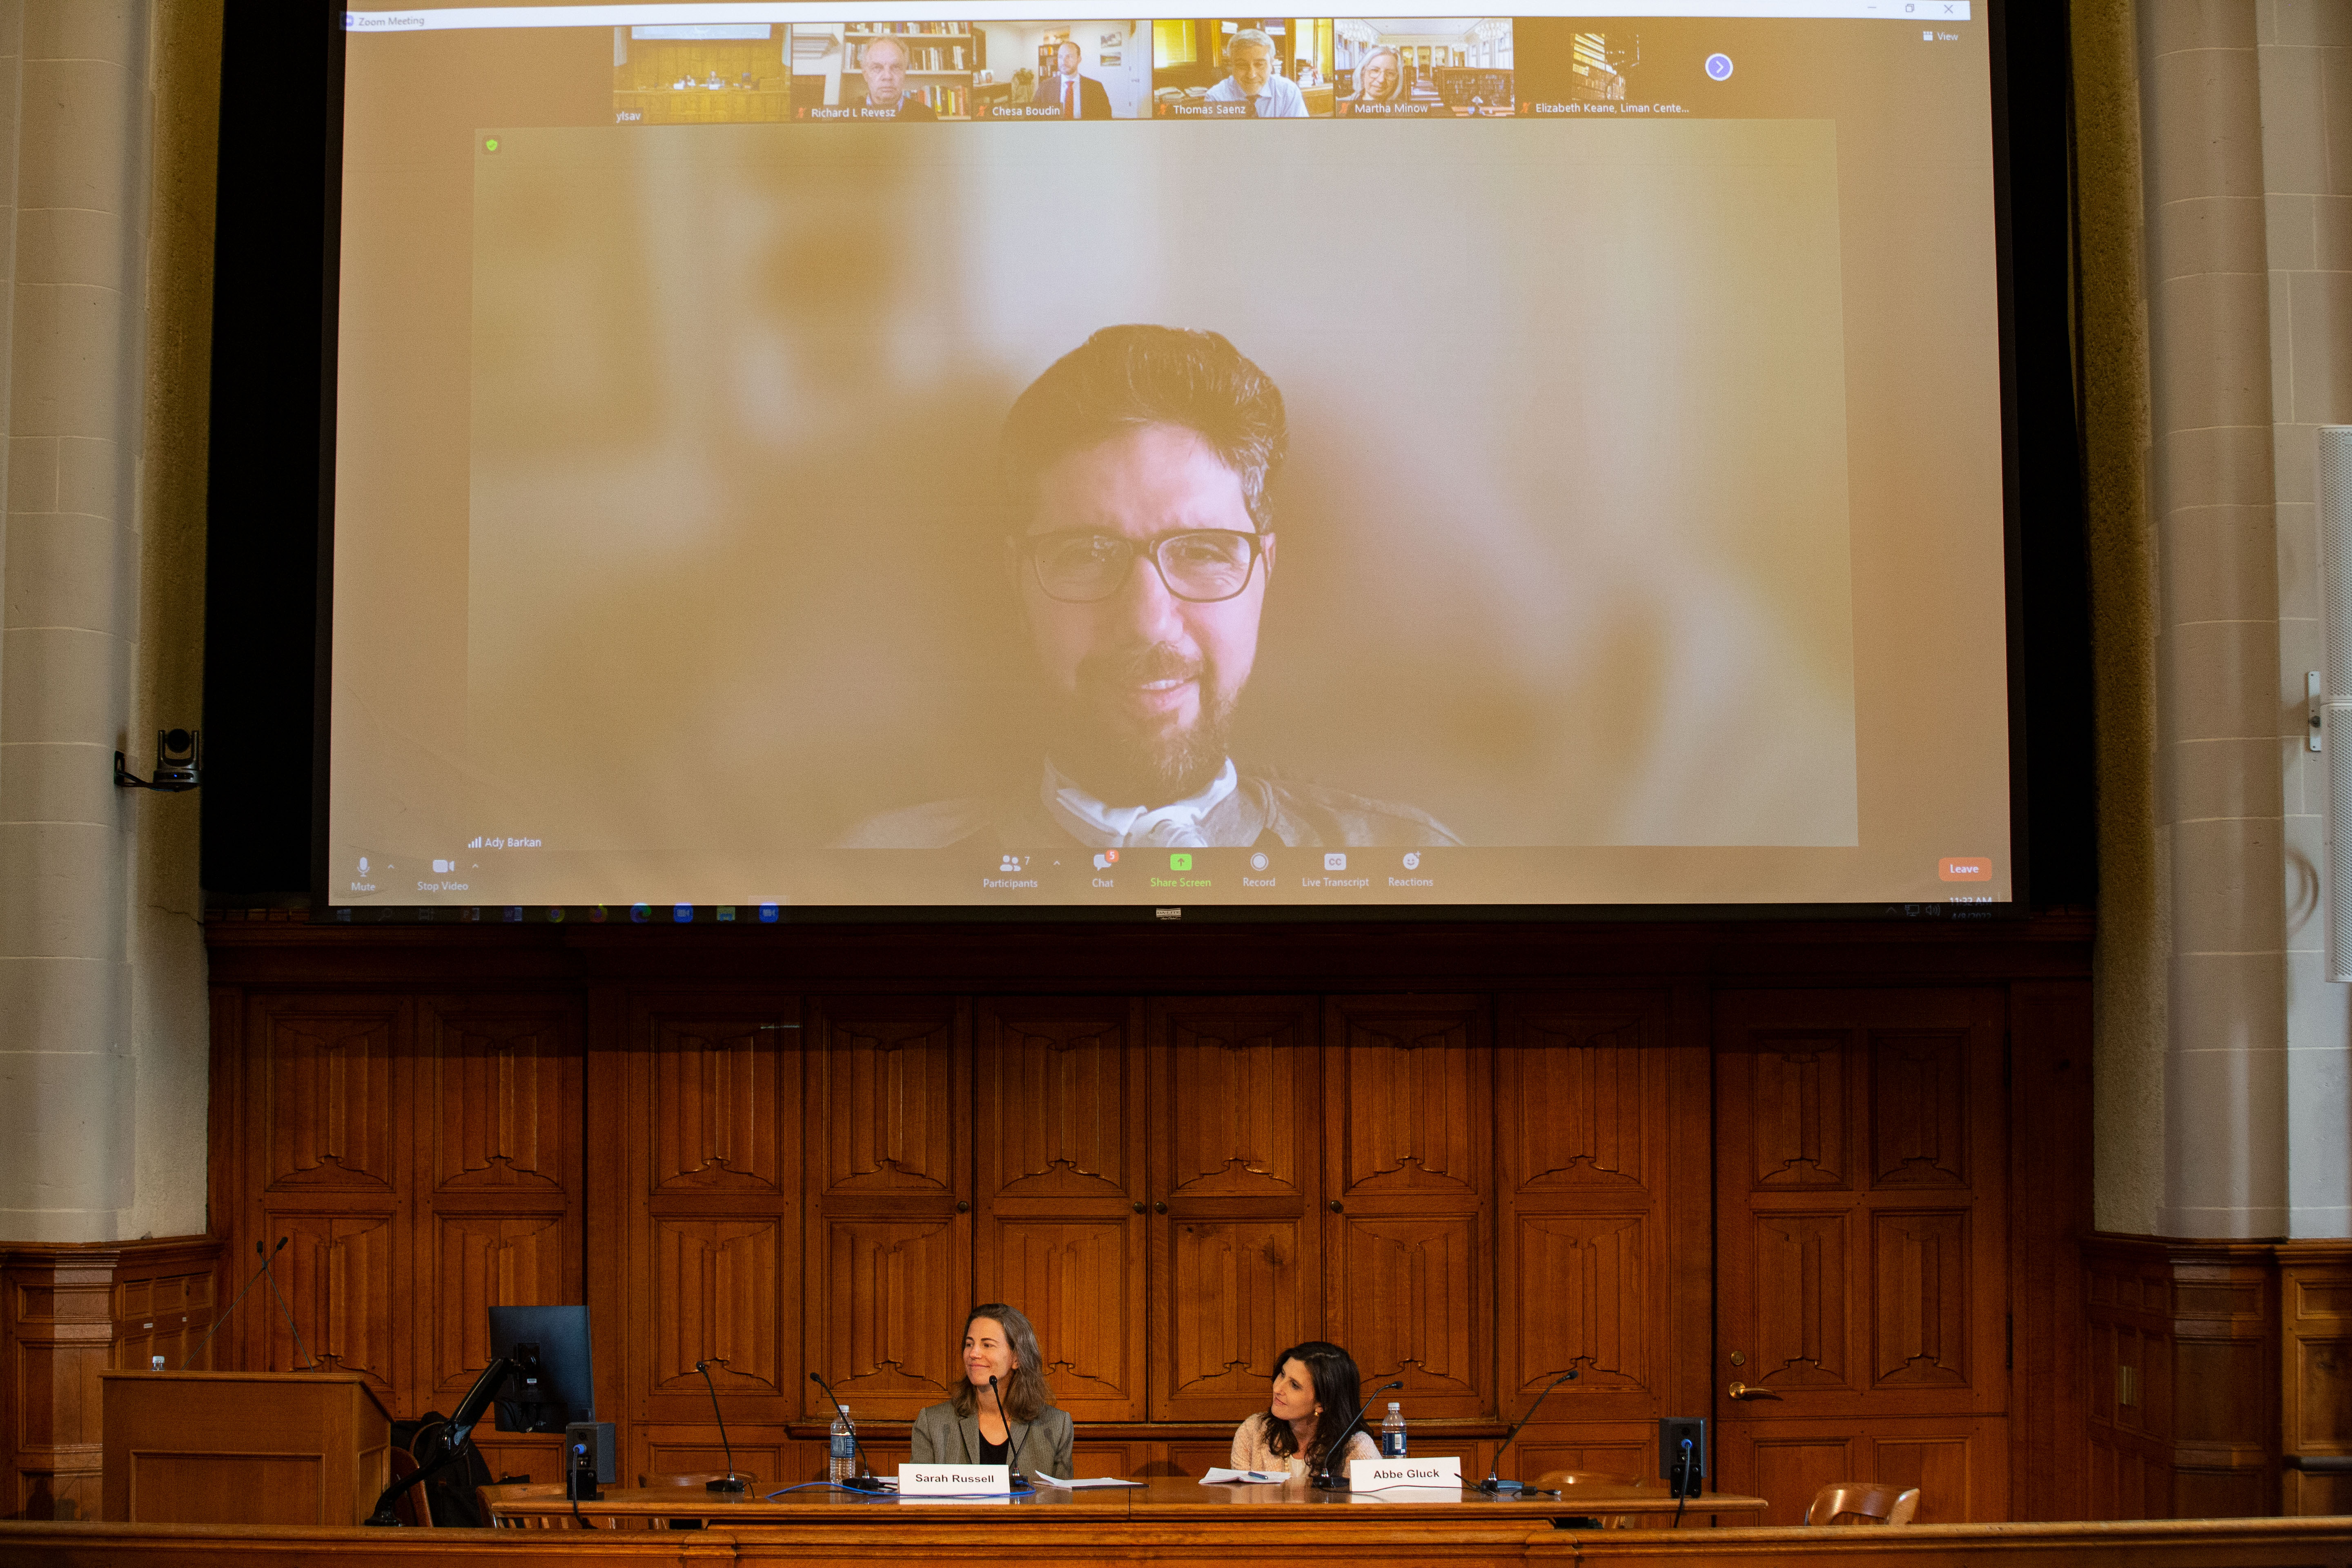 Ady Barkan’s face is shown on a large projection screen above the panelists’ table in an auditorium